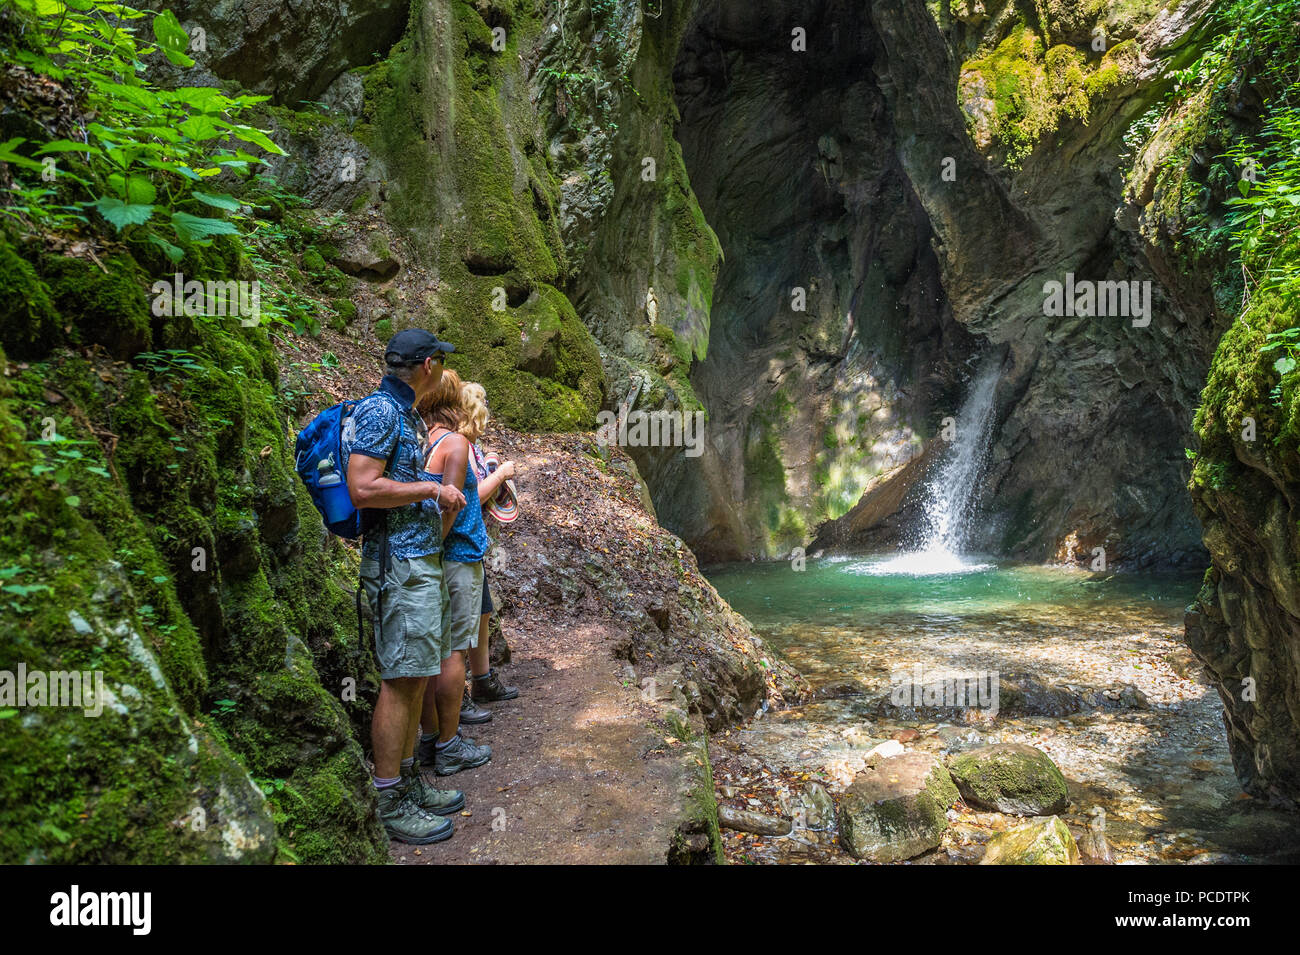 The waterfall Gorg D’Abiss at Tiarno Di Sotto, Italy. Stock Photo